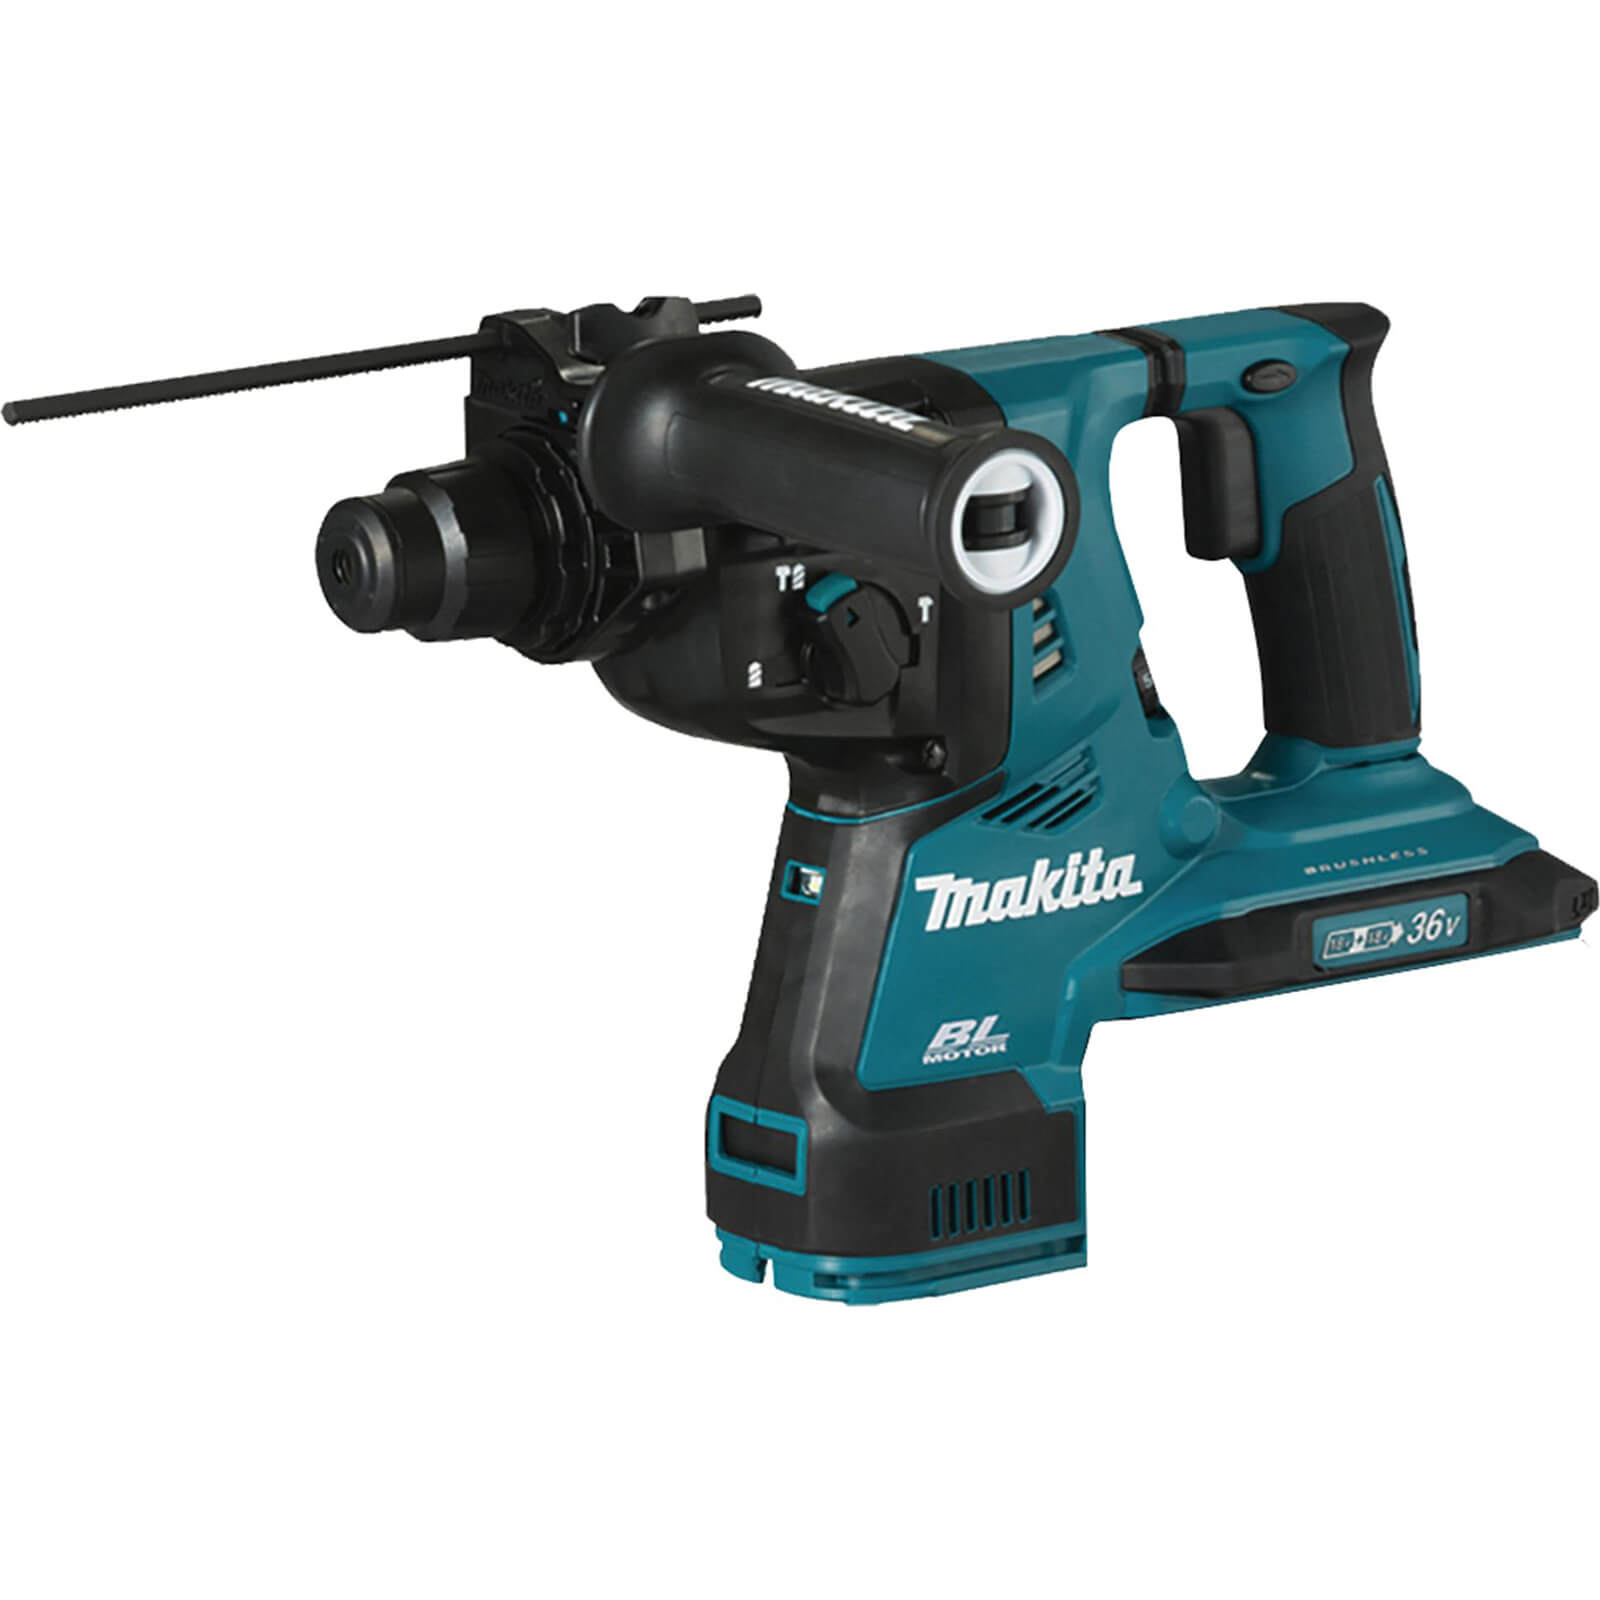 Image of Makita DHR280 Twin 18v LXT Cordless Brushless SDS Hammer Drill No Batteries No Charger Case